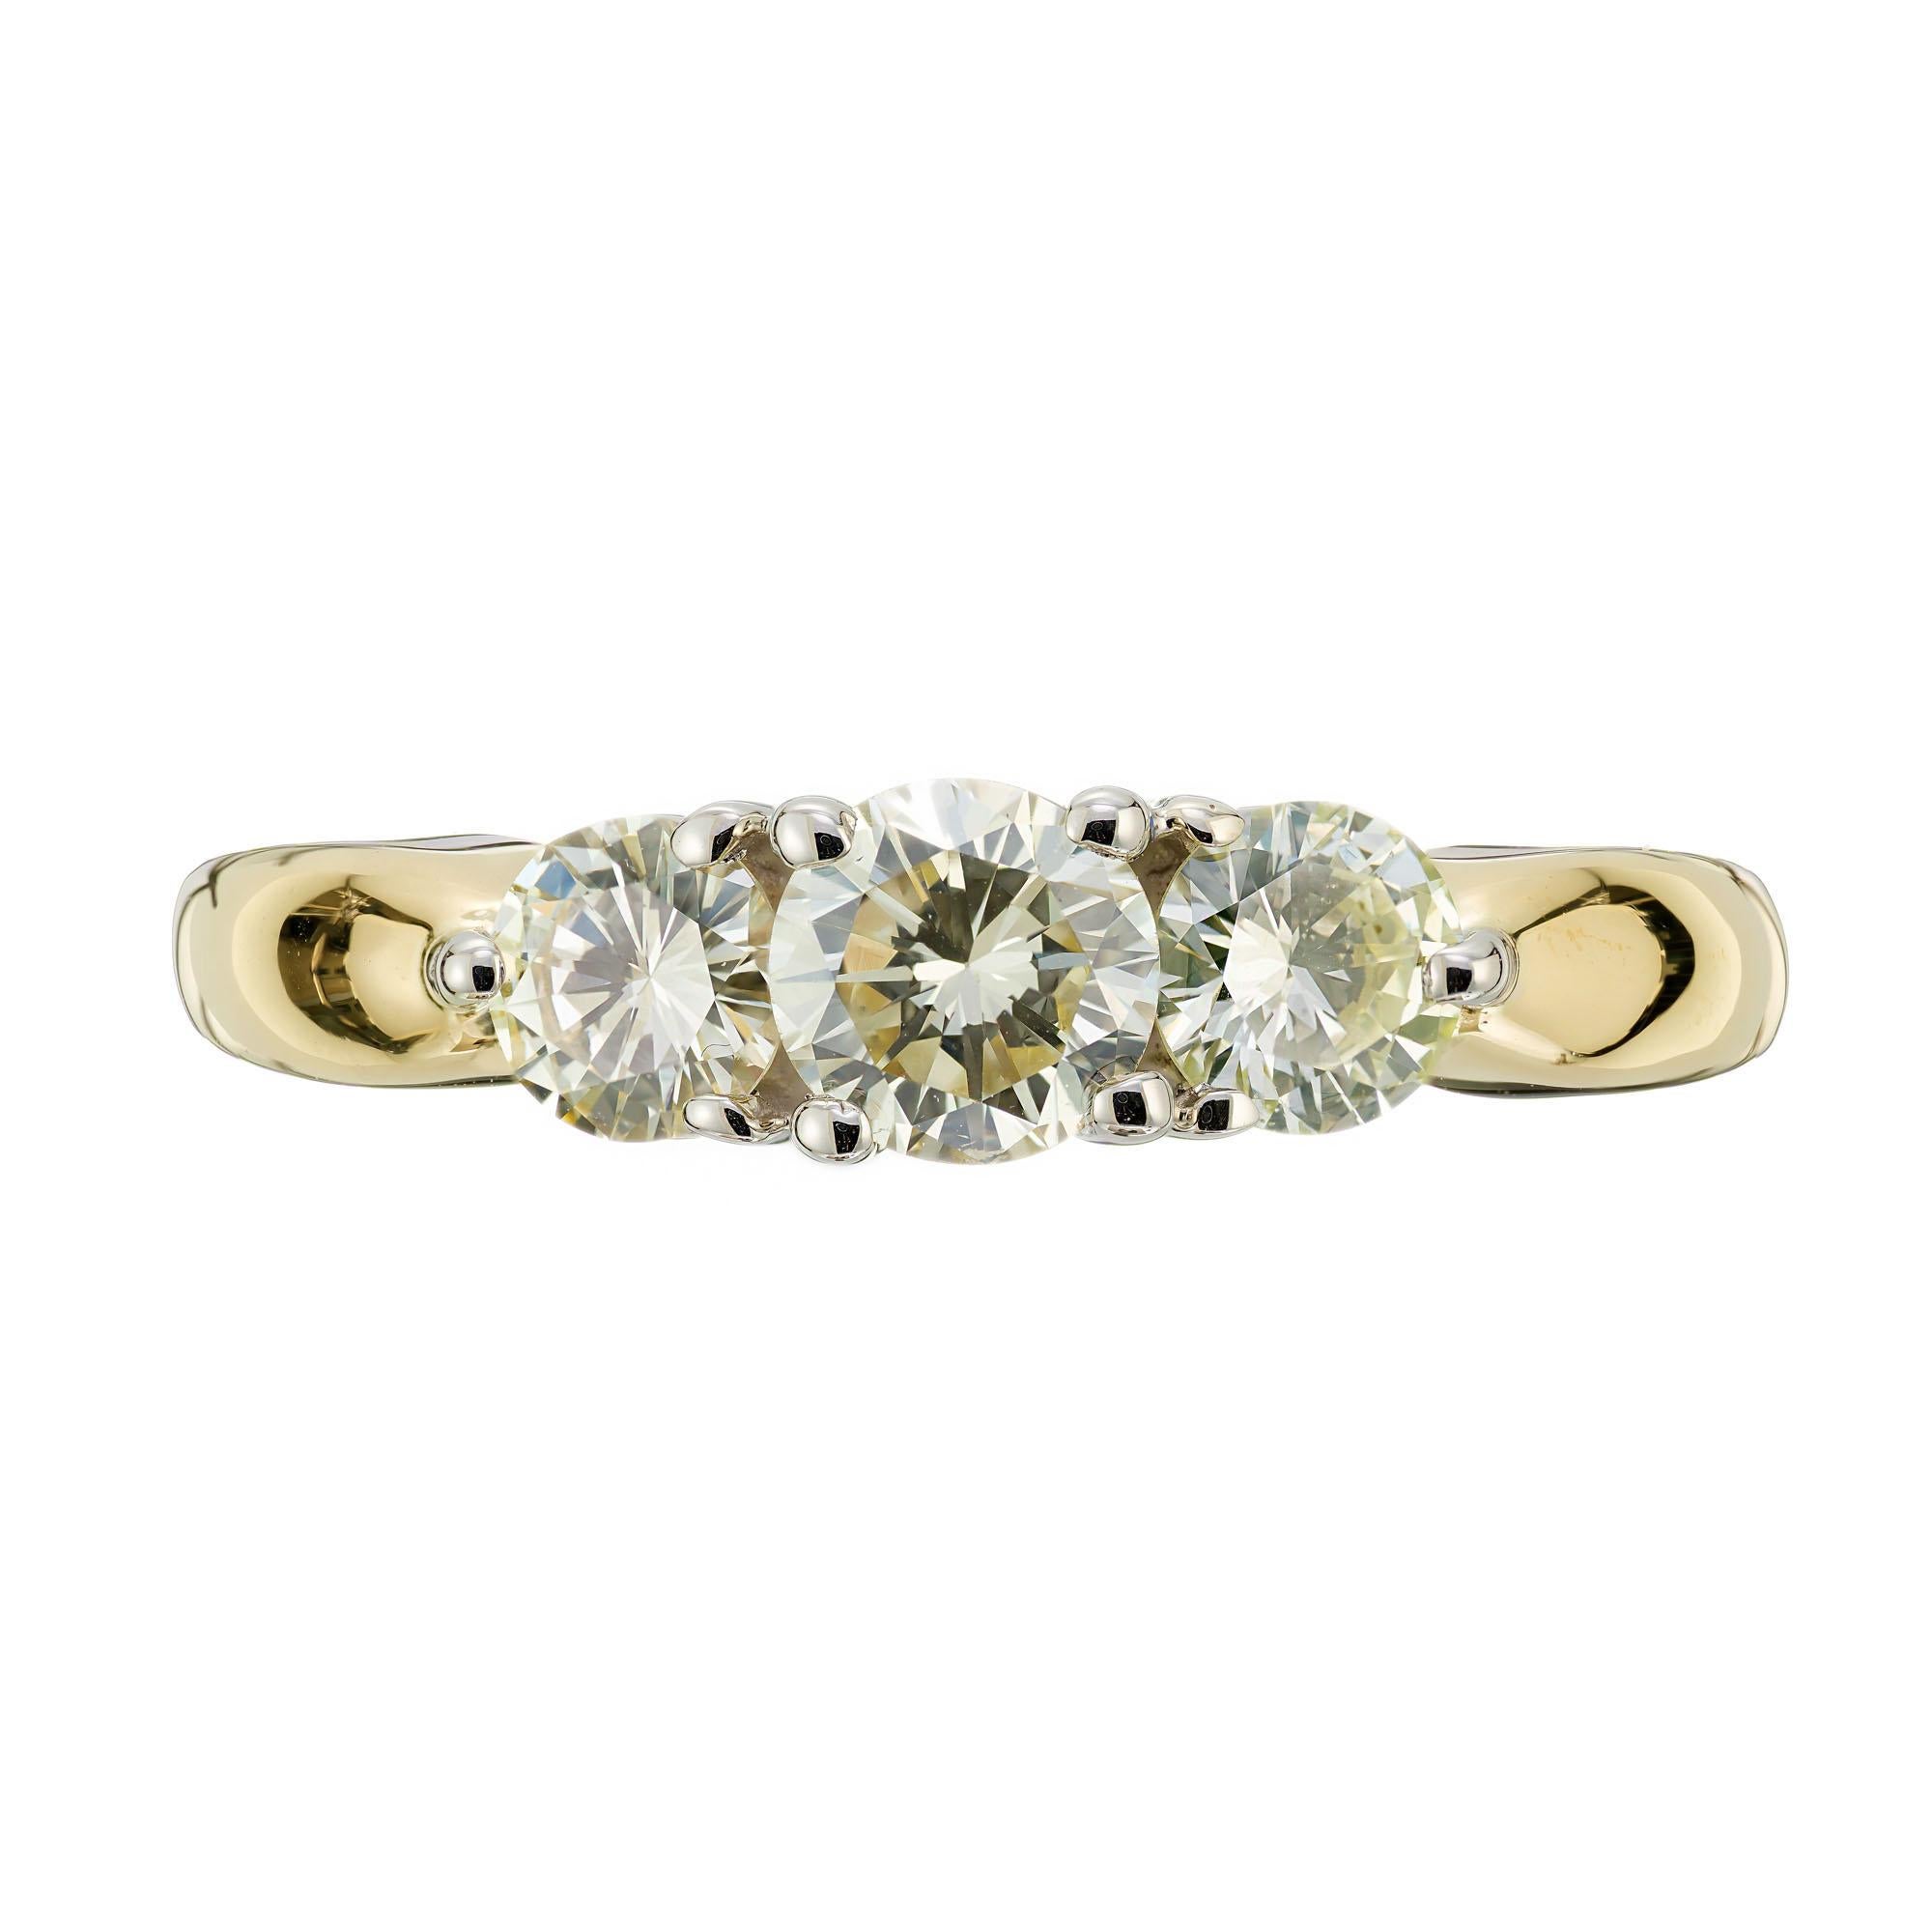 Classic three stone diamond engagement ring. .38 carat center stone with 2 round brilliant cut side diamonds in a 14k yellow and white gold setting. 

1 round brilliant cut diamond, K VS approx. .38cts
2 round brilliant cut diamonds, J-K VS approx.